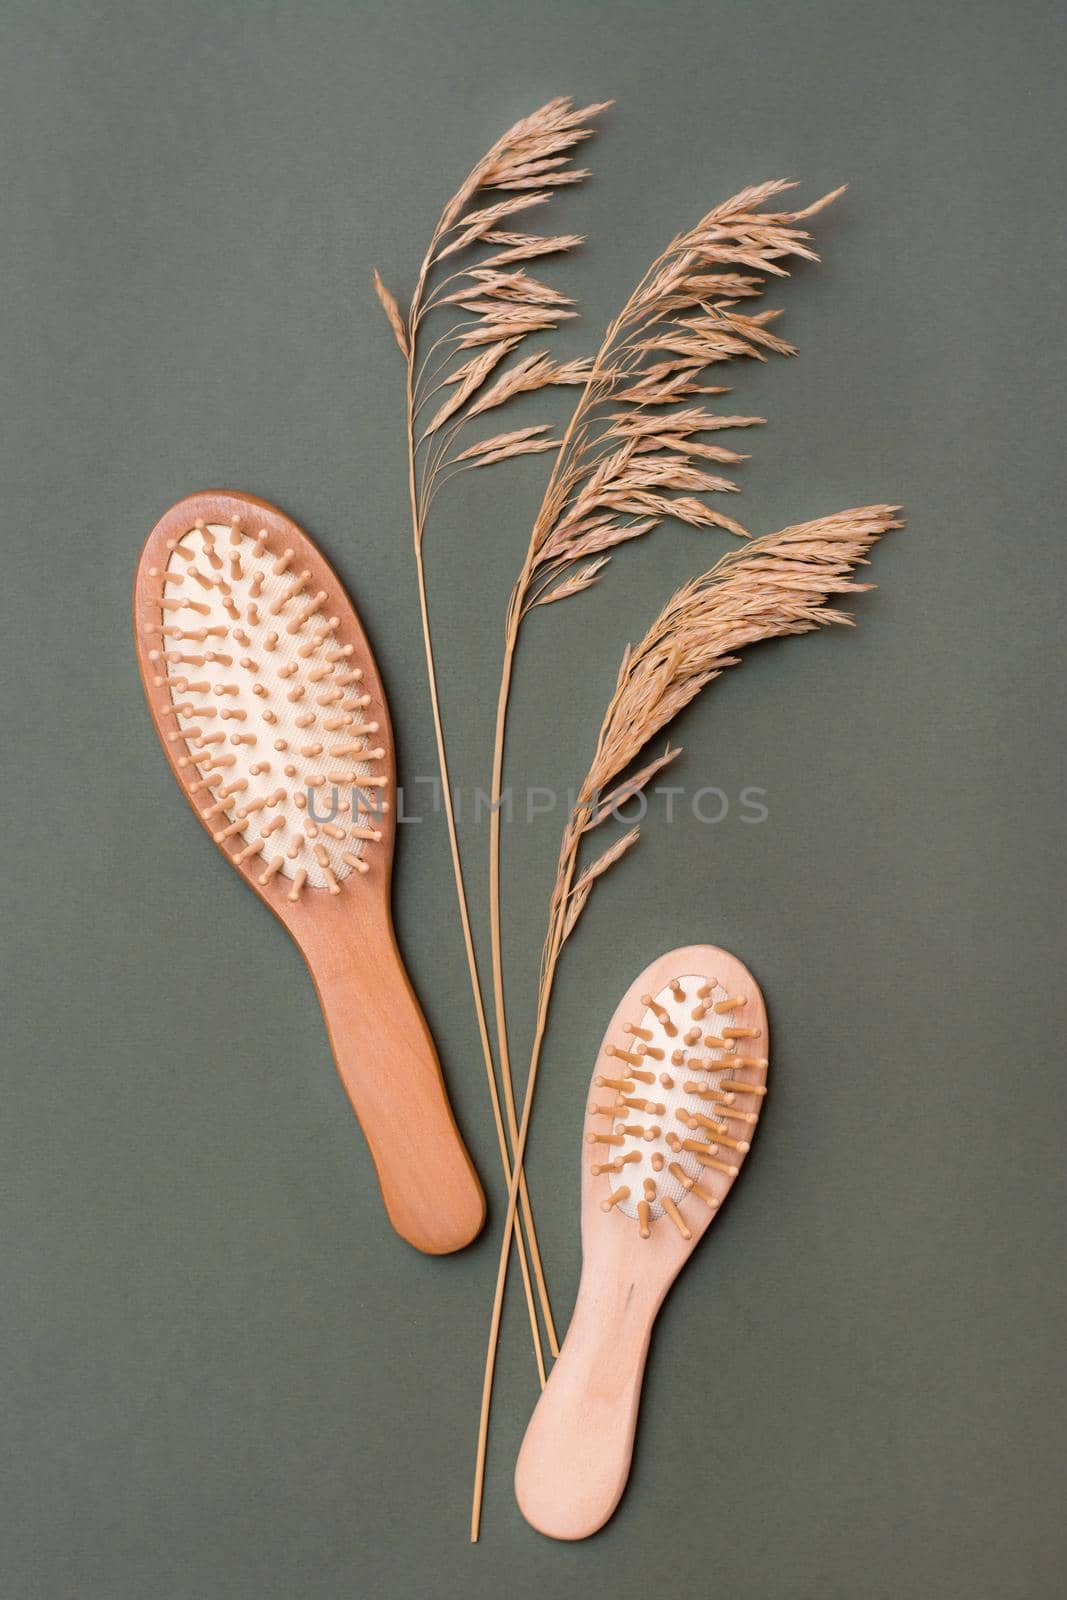 Hair care. Two wooden combs and ears of grass on a green background. Vertical view